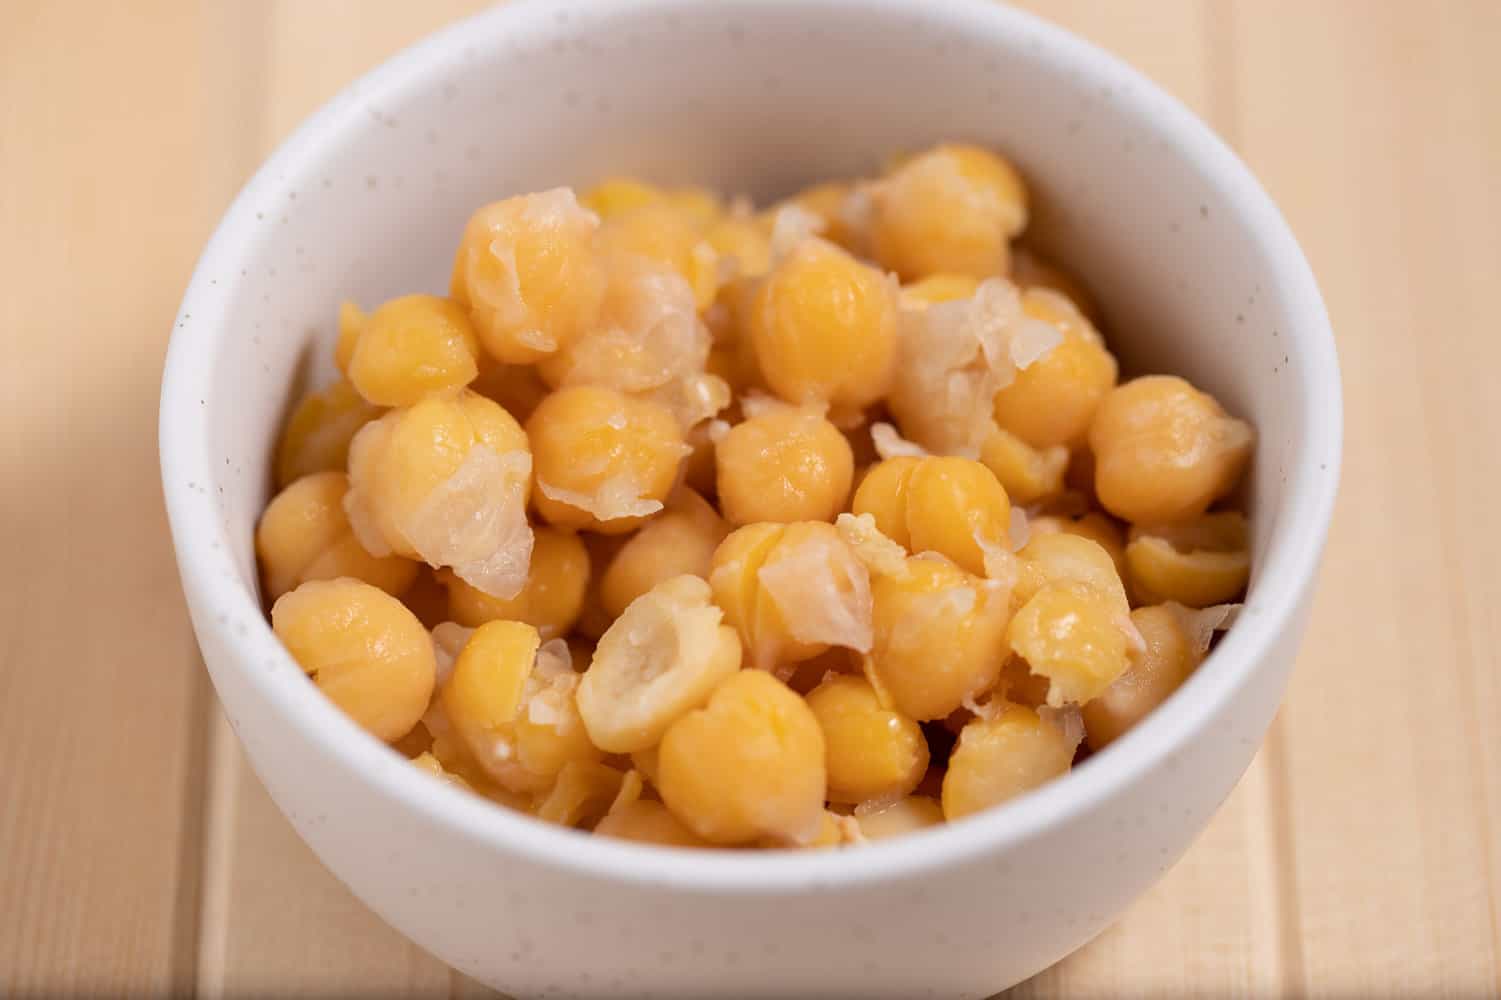 chickpeas soaked in water and baking soda